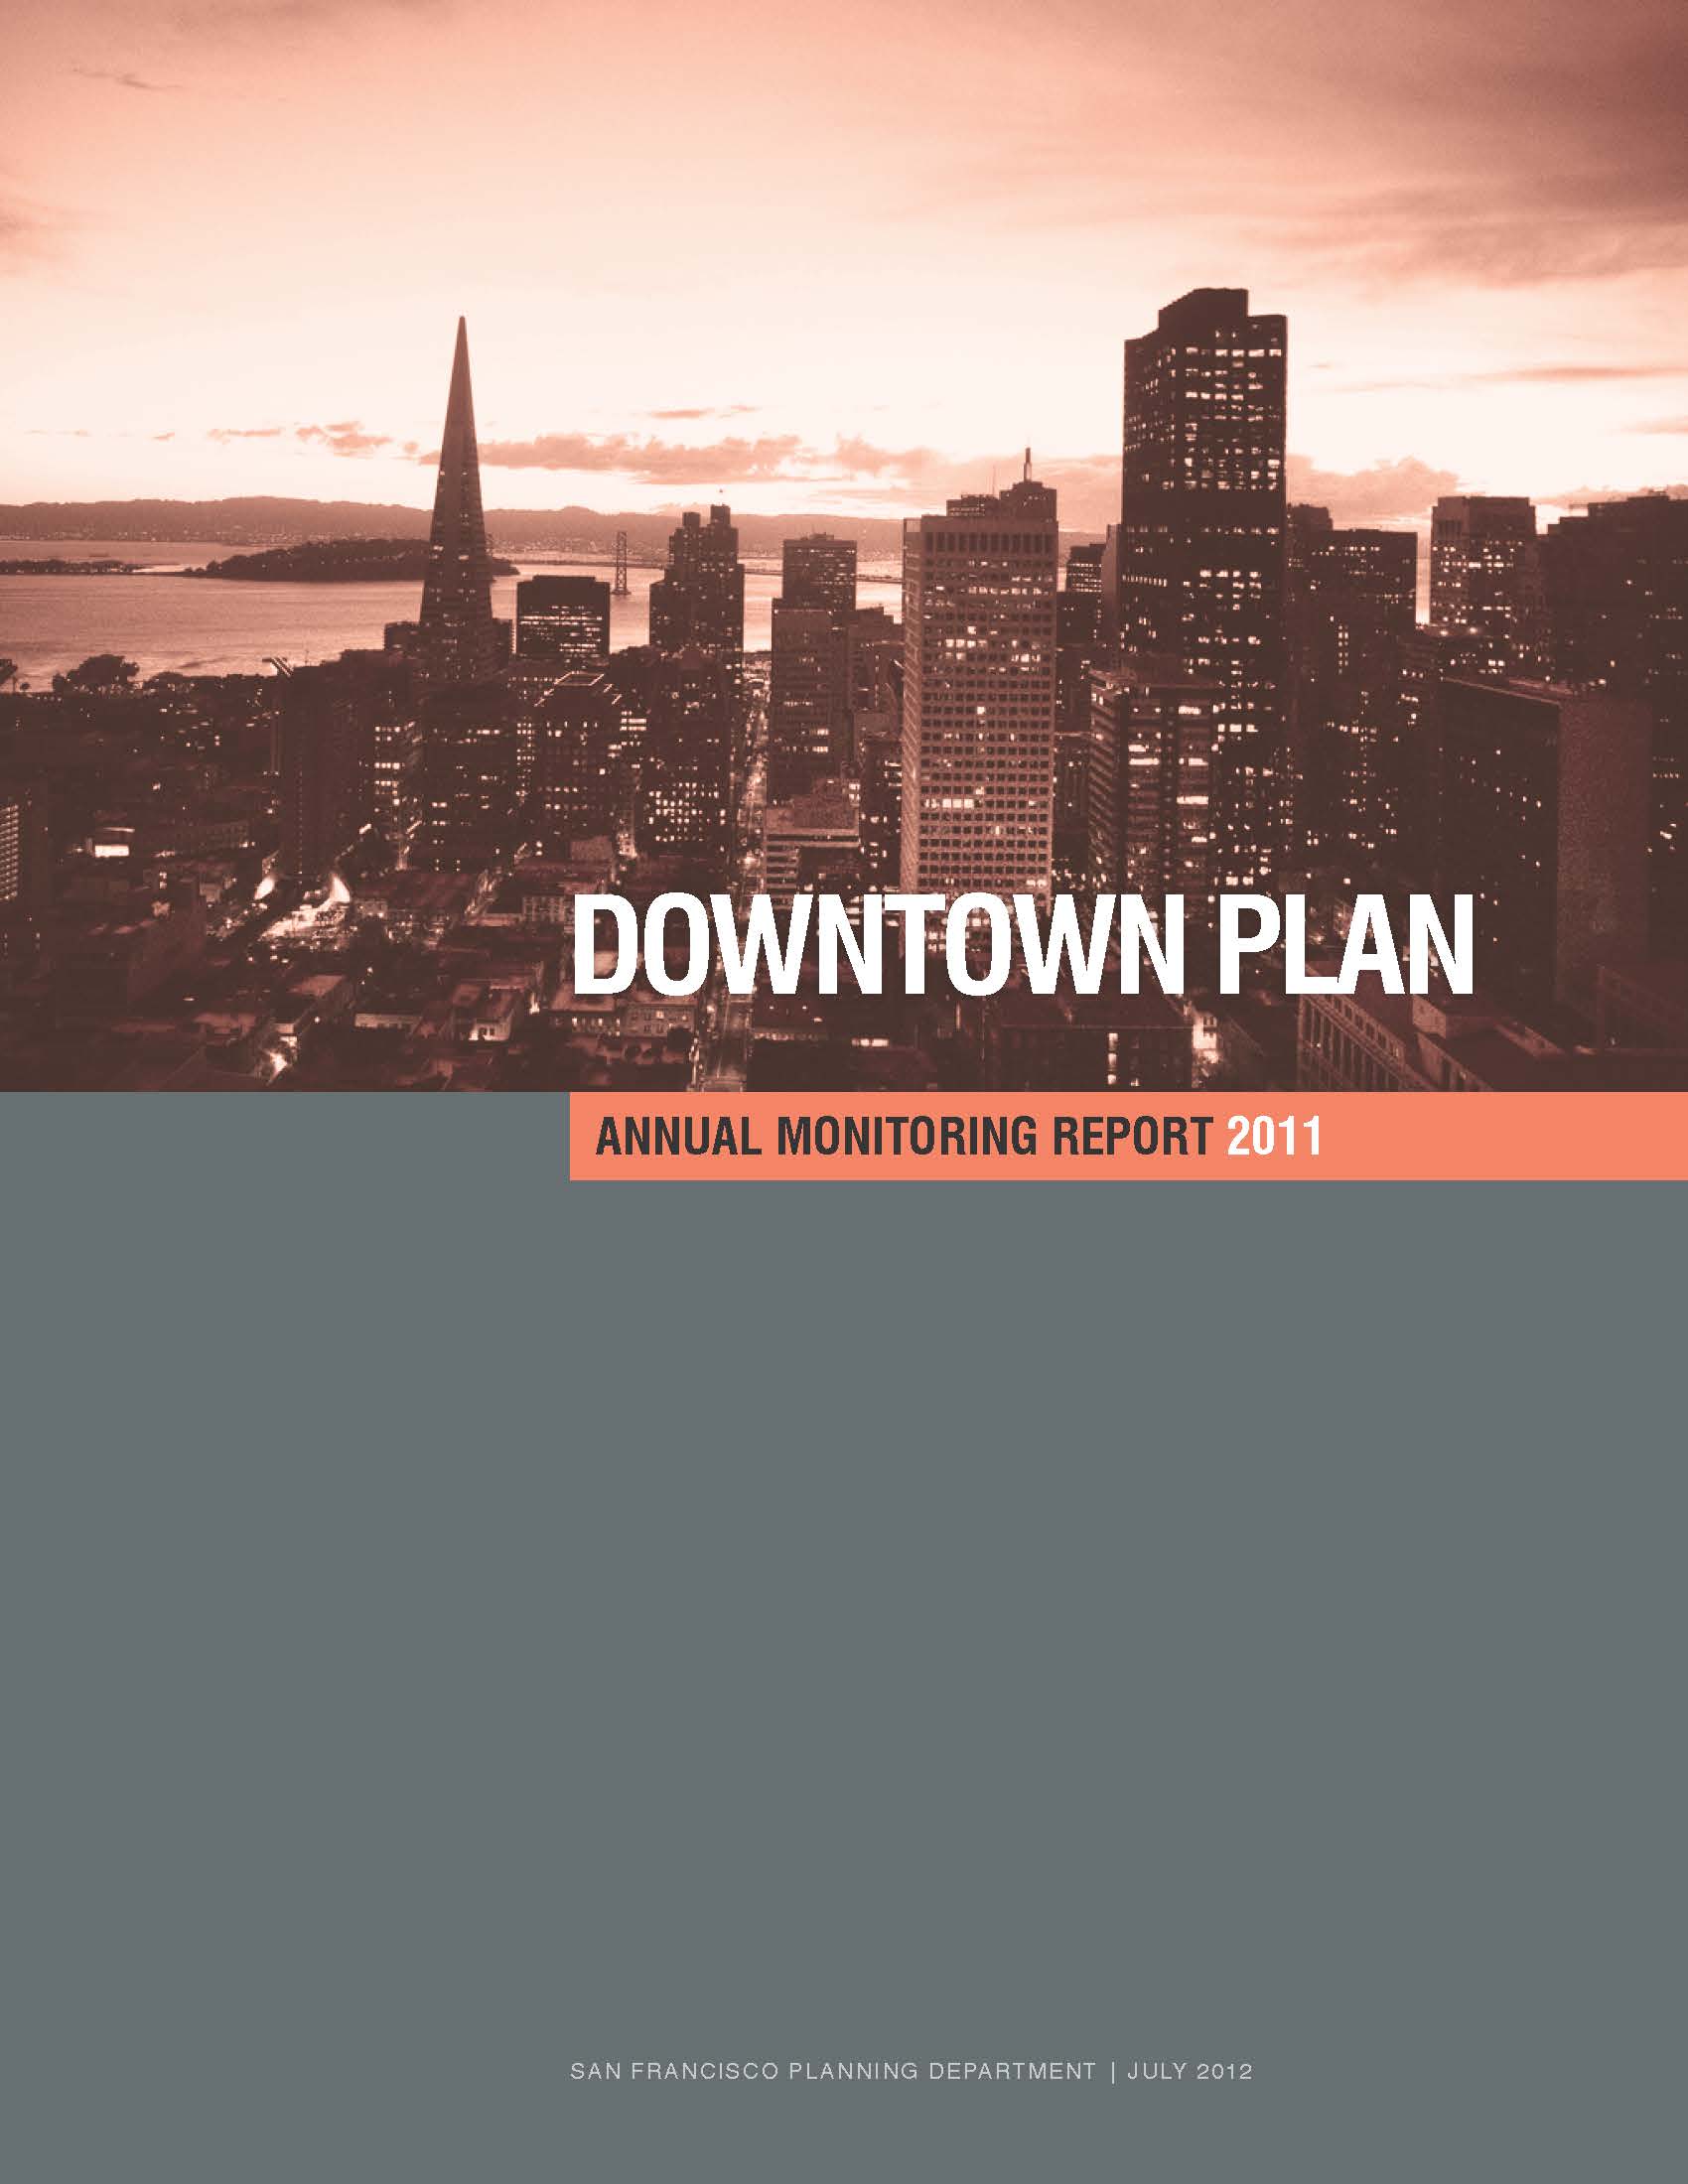 Cover Image for the Downtown Plan Monitoring Report 2011